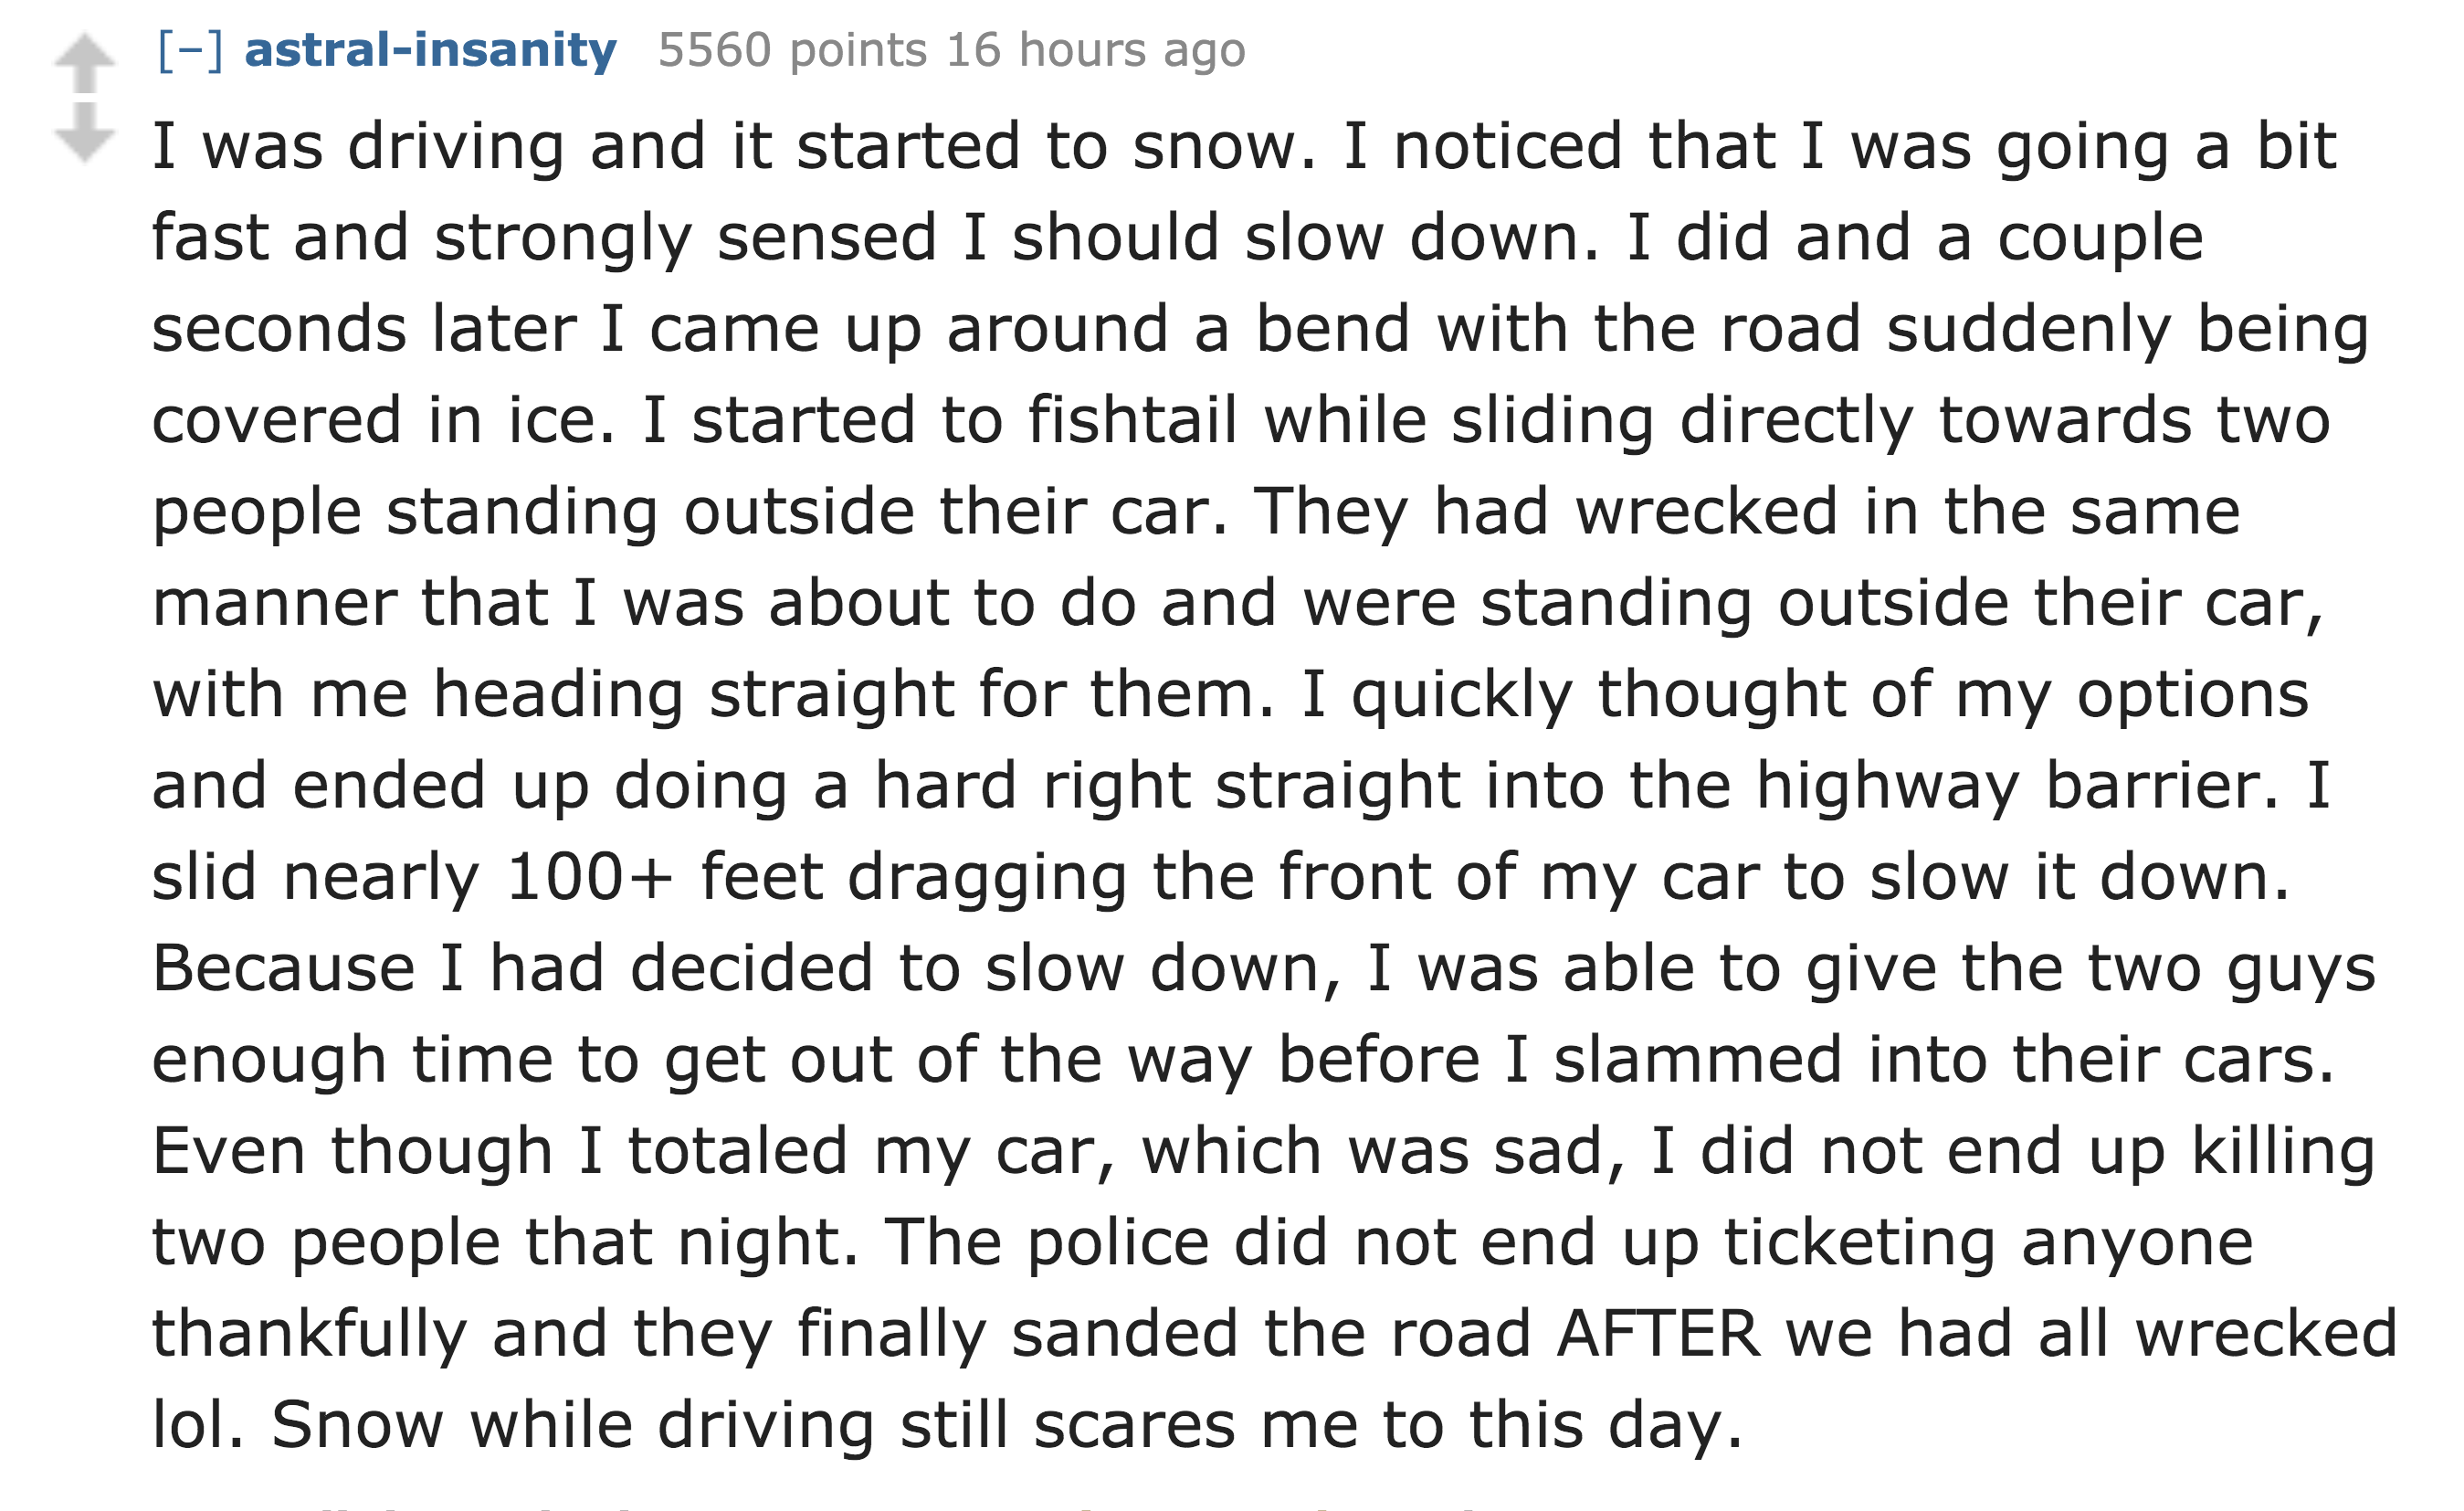 guy wants from his girlfriend - astralinsanity 5560 points 16 hours ago I was driving and it started to snow. I noticed that I was going a bit fast and strongly sensed I should slow down. I did and a couple seconds later I came up around a bend with the r